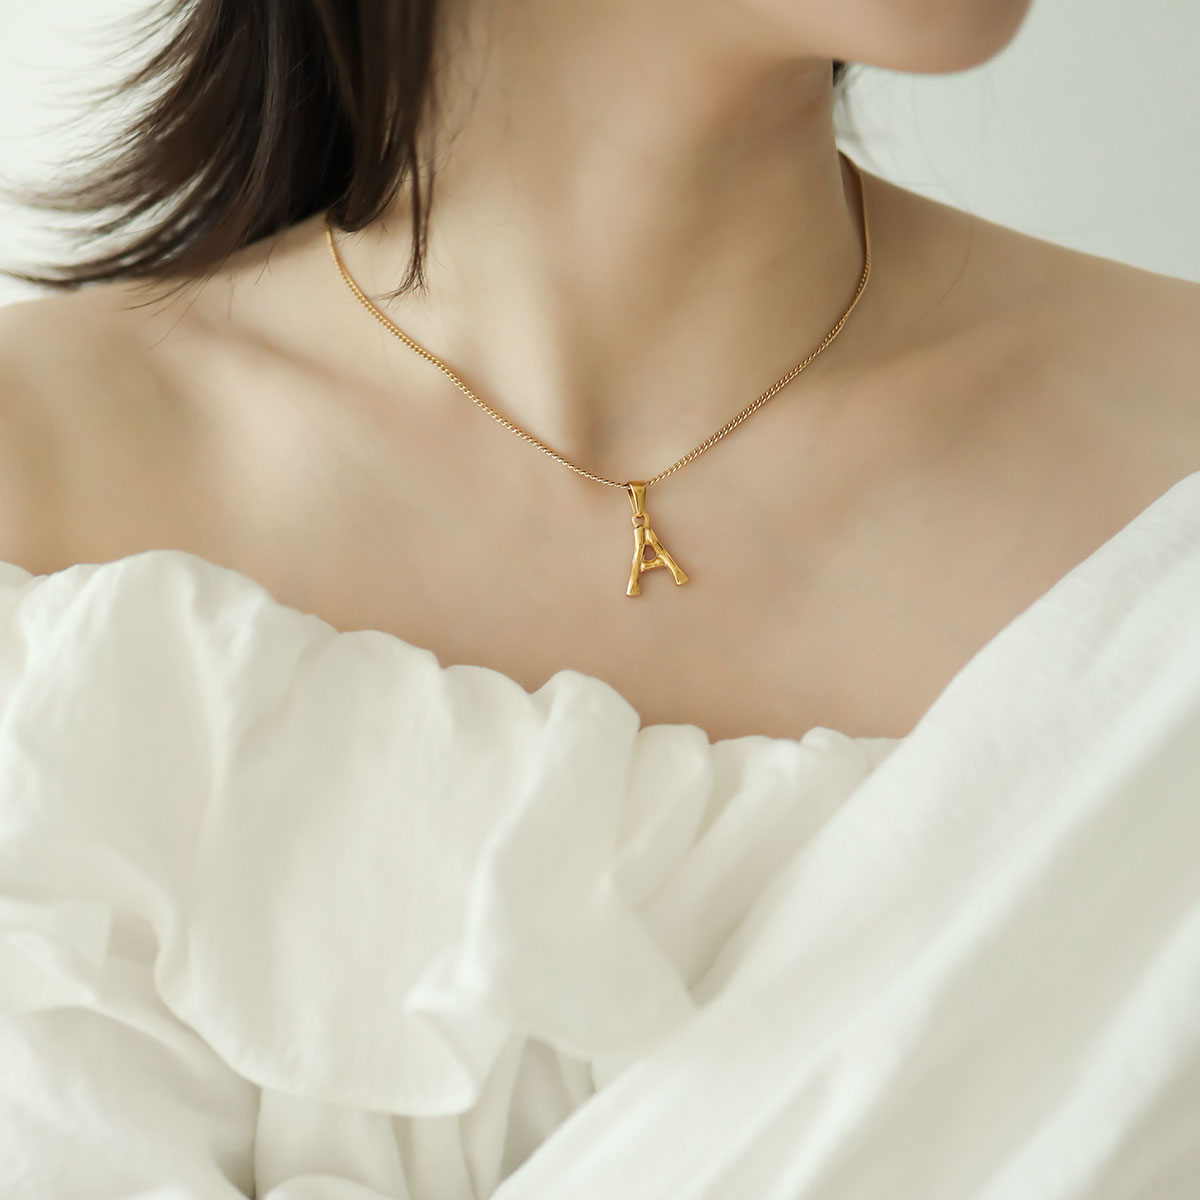 Women wear gold initial necklace with A.